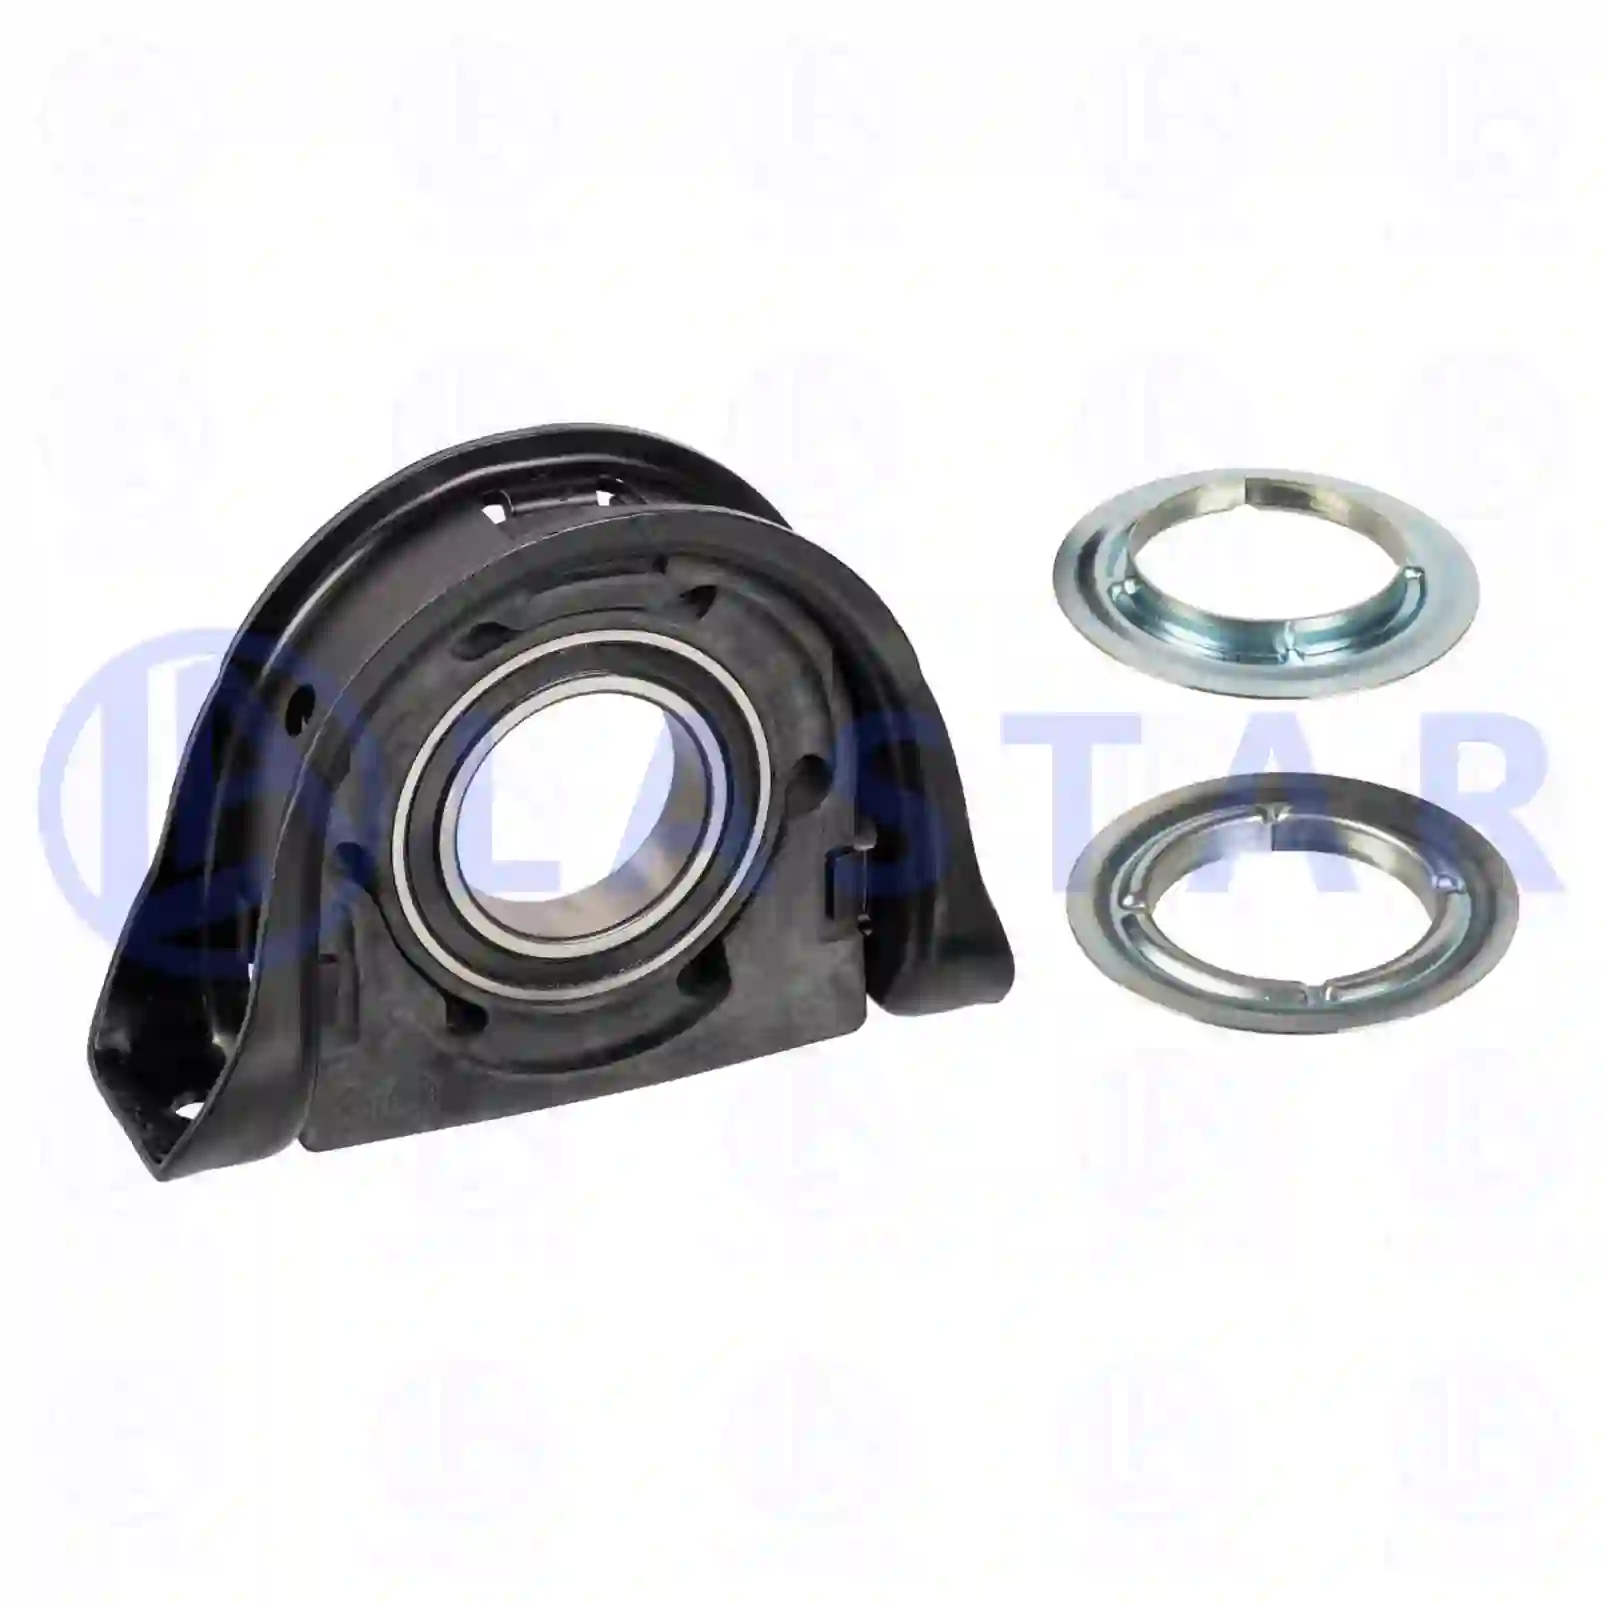 Support Bearing Center bearing, la no: 77734218 ,  oem no:7420875962, 20875962, ZG02478-0008 Lastar Spare Part | Truck Spare Parts, Auotomotive Spare Parts